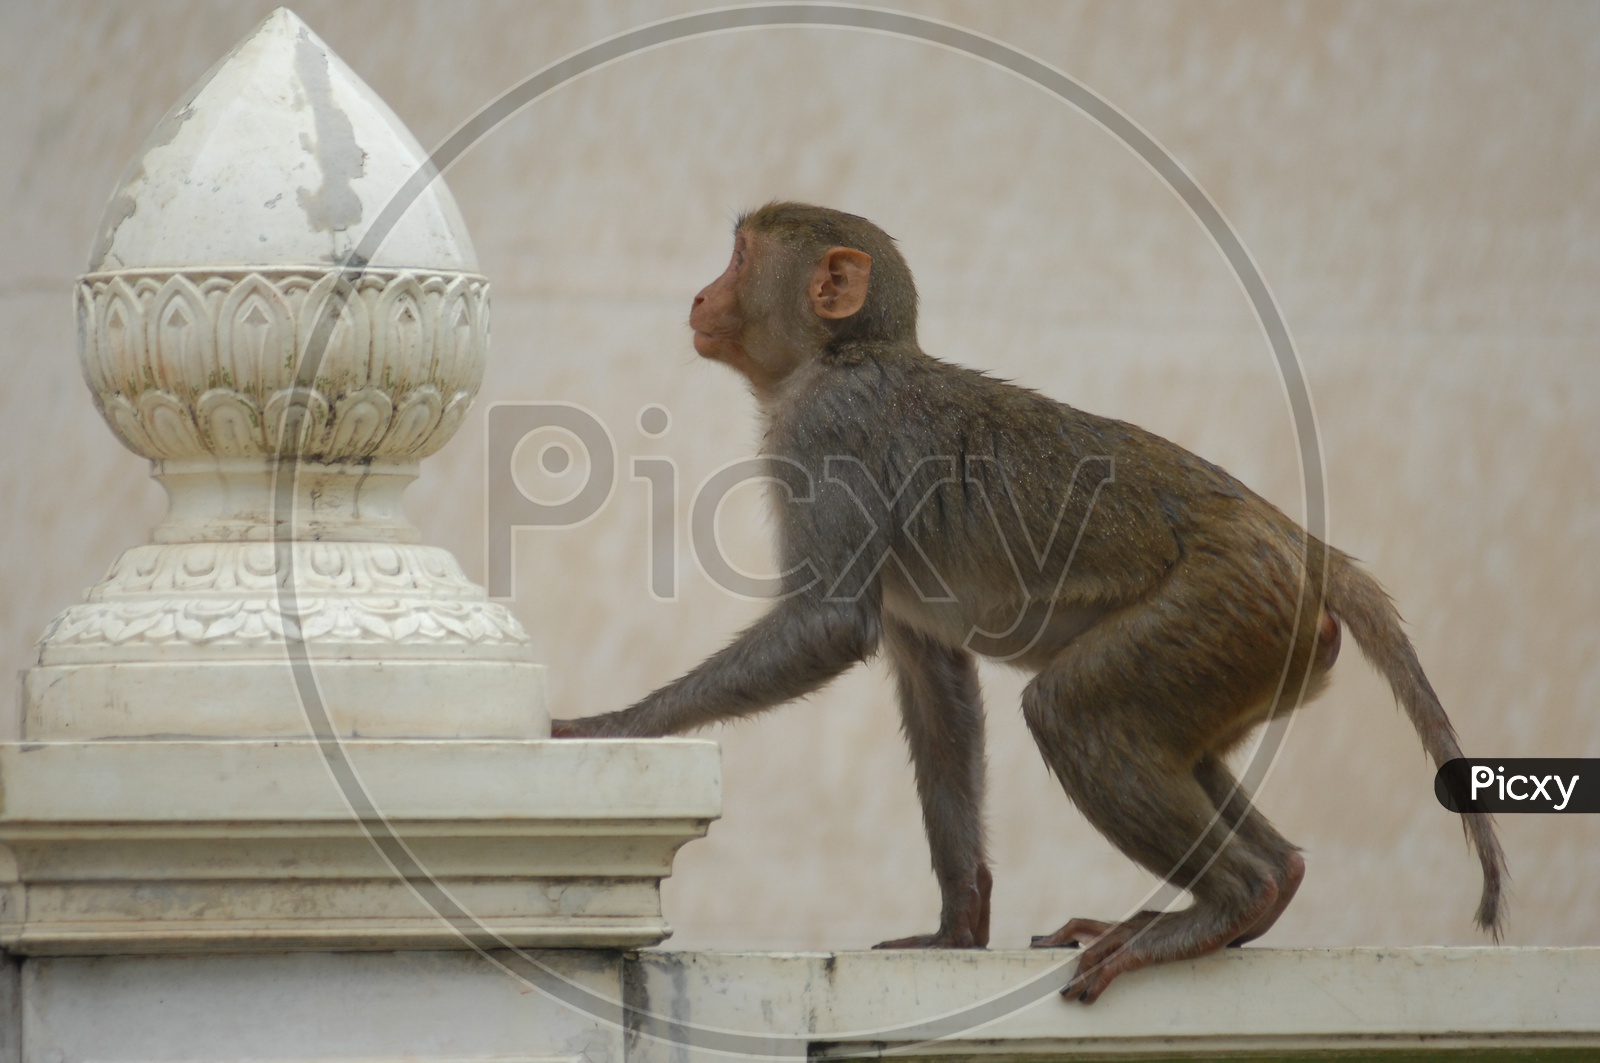 Indian Monkeys Or Macaques Doing Feats on walls